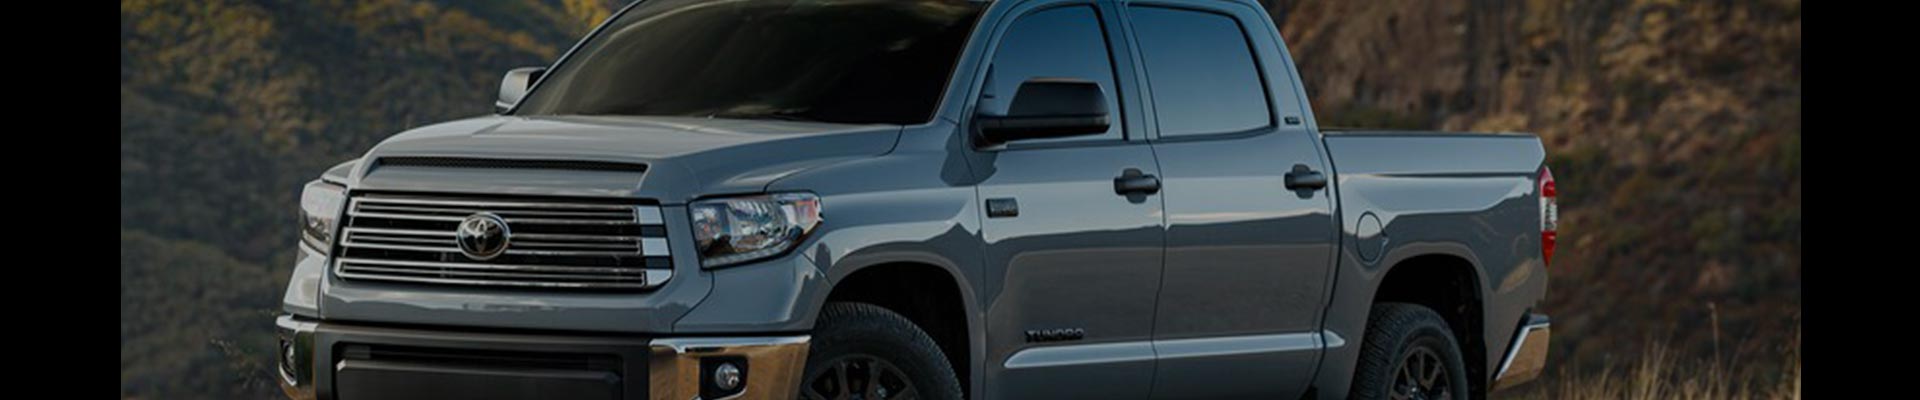 Shop Replacement and OEM 2010 Toyota Tundra Parts with Discounted Price on the Net